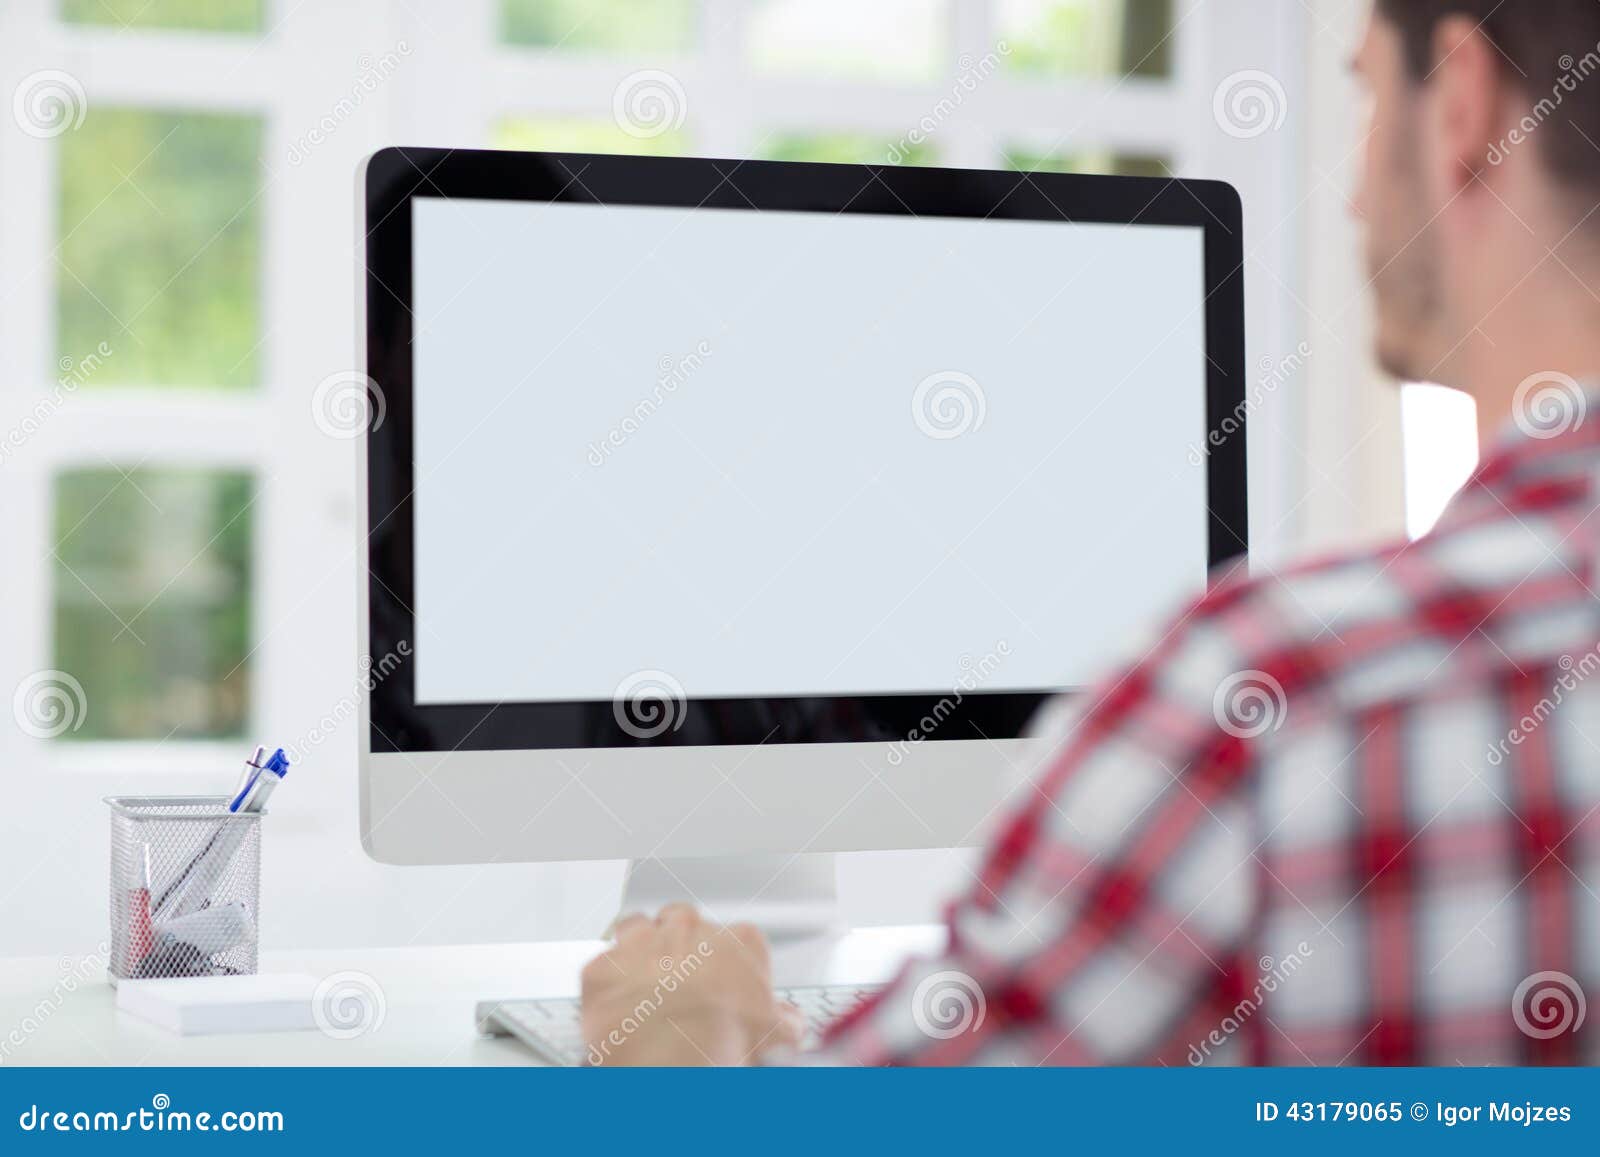 man in front of computer screen